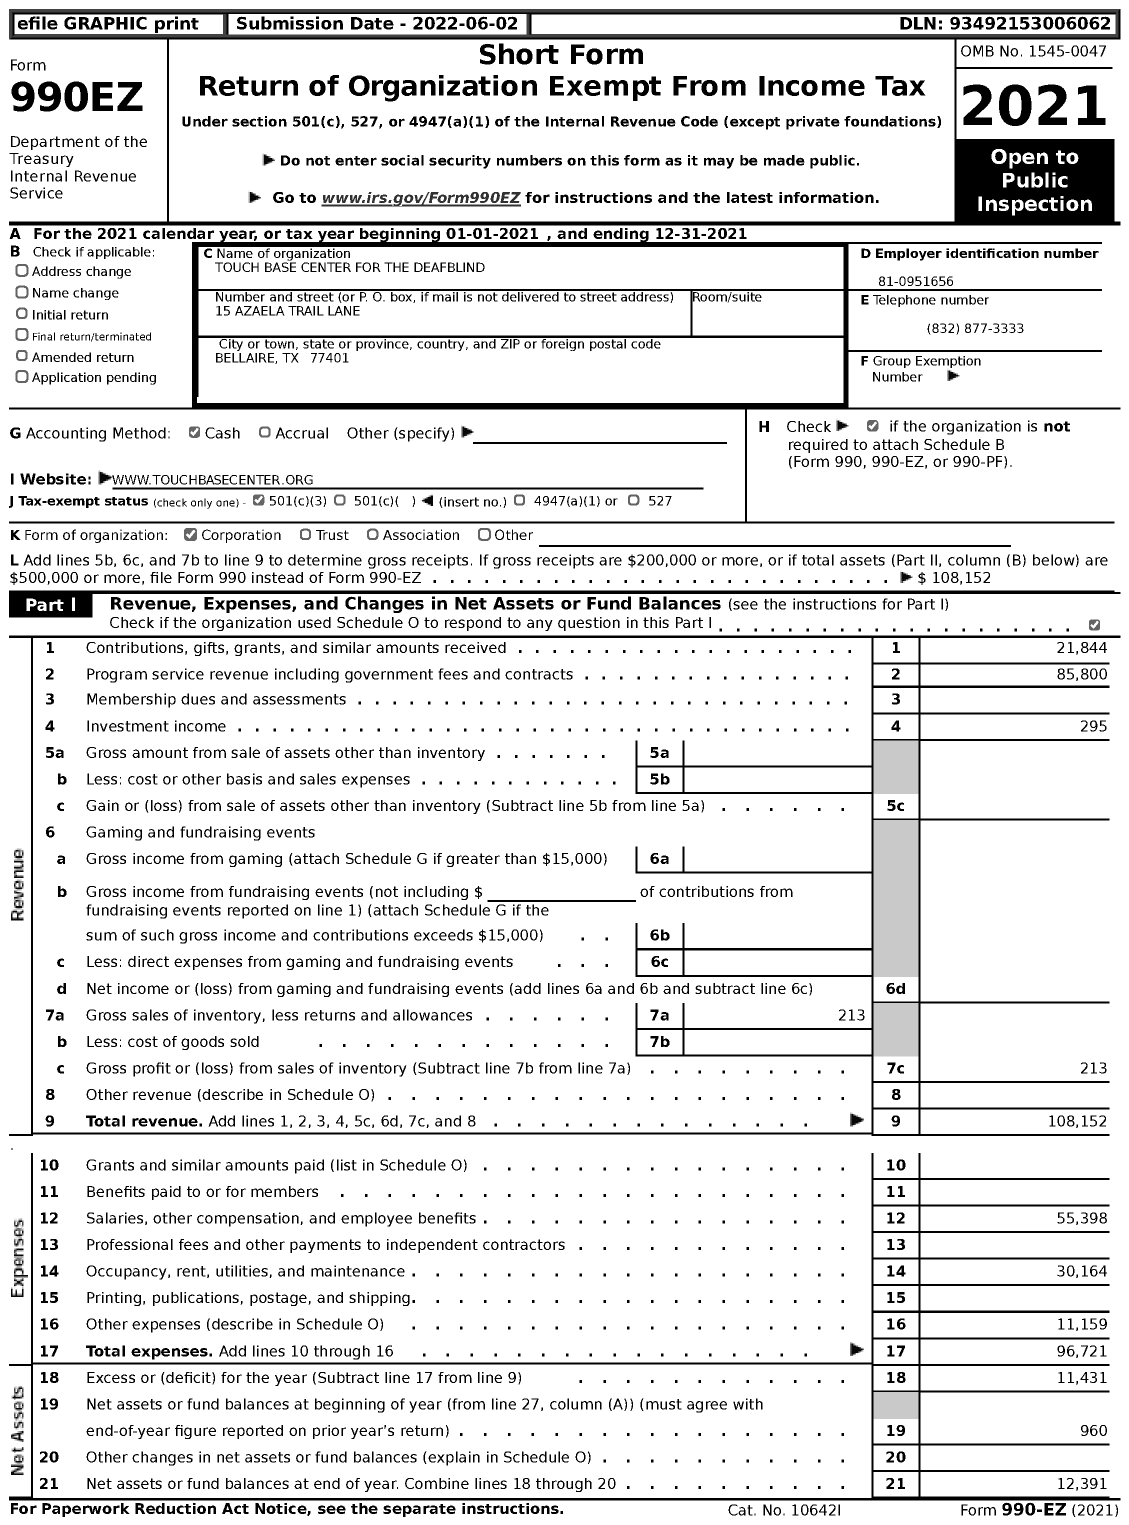 Image of first page of 2021 Form 990EZ for Touch Base Center for the Deafblind